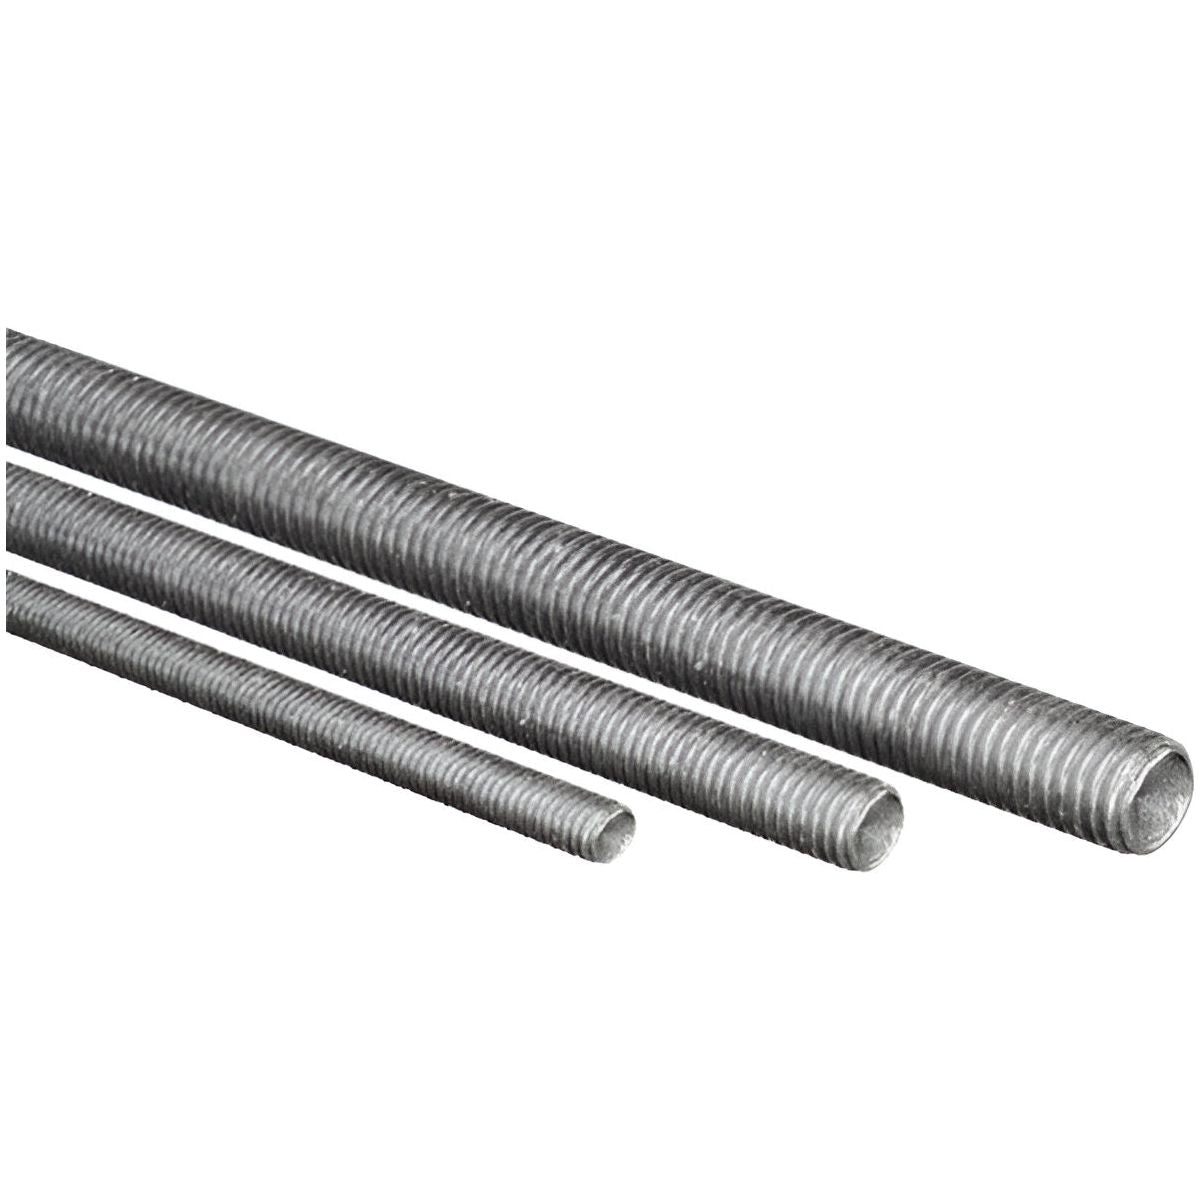 Wot-Nots Threaded Bar Including Nuts & Washers M6 X 300mm